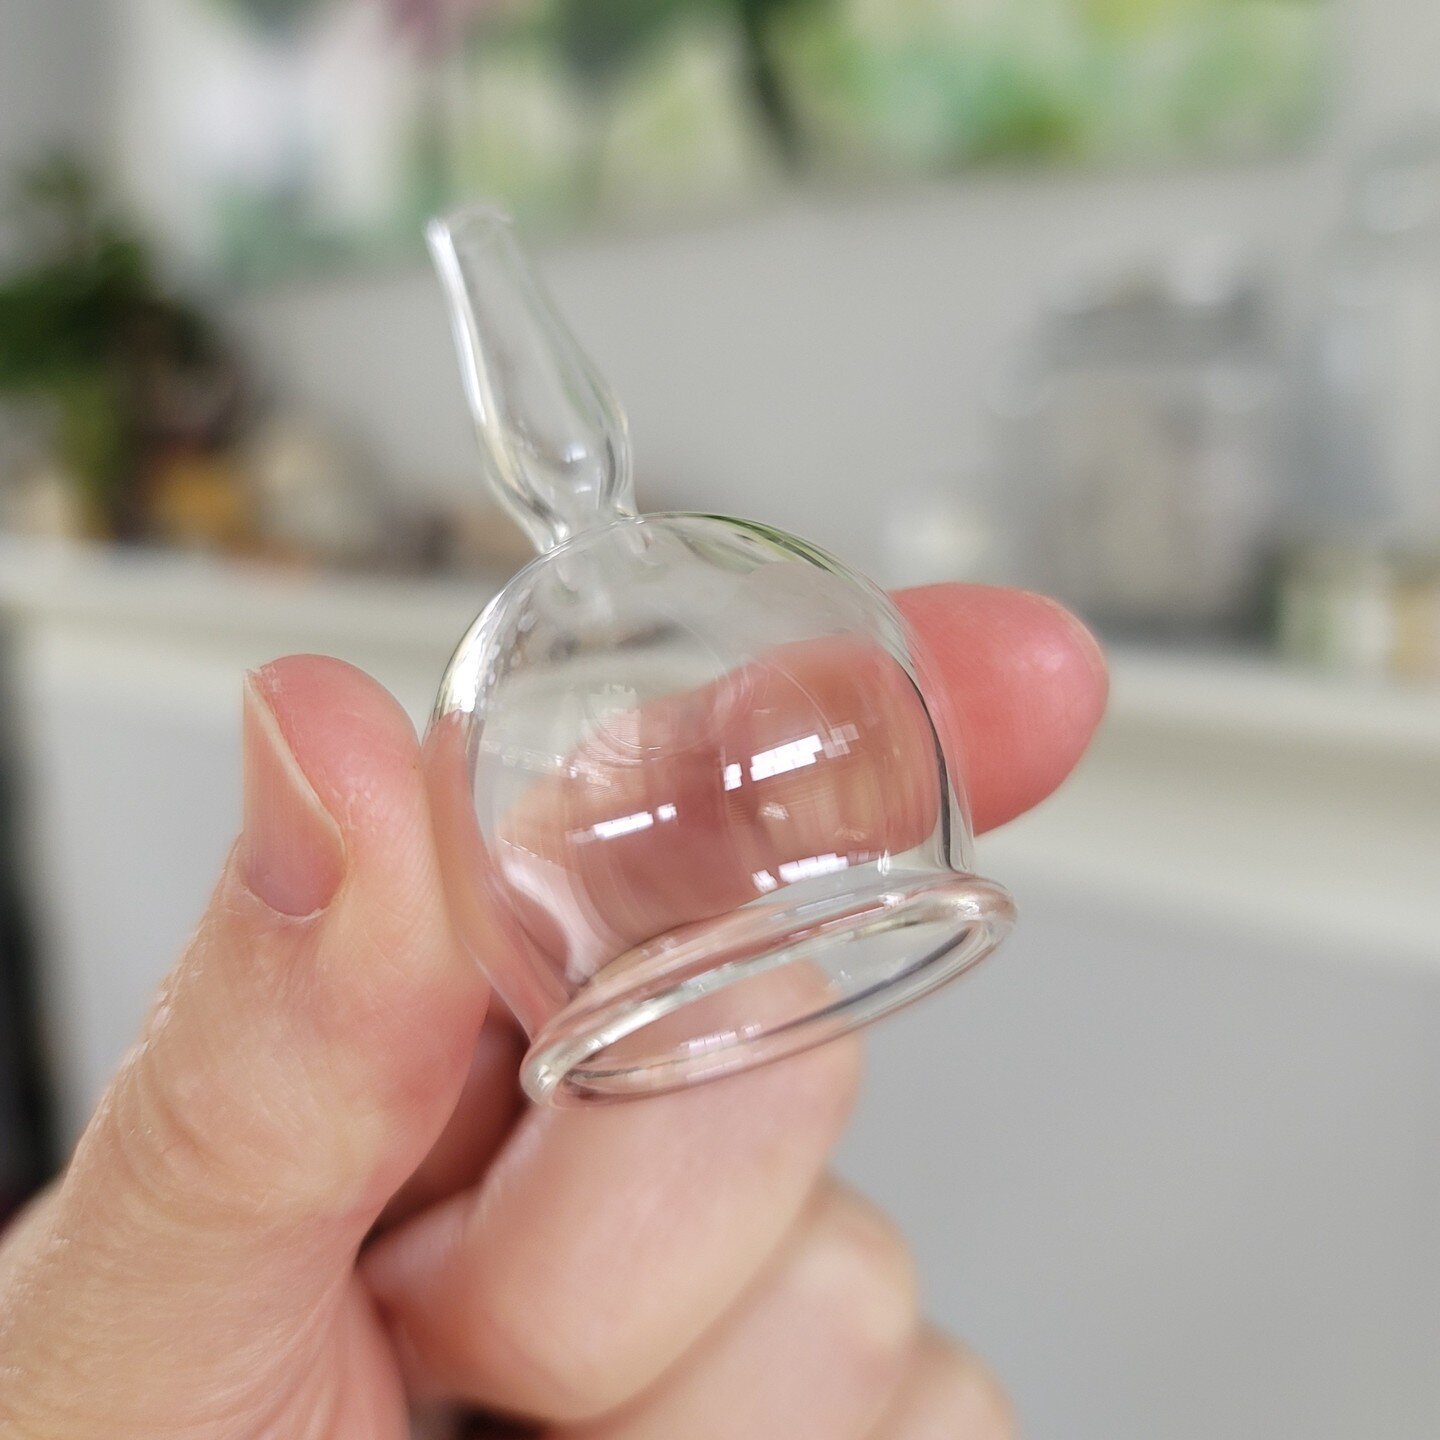 I love these small glass cups.
So cute and so effective!
Absolutely fantastic for sinus congestion.
Bust the sinus pressure this Spring.
Oh, and soften lines &amp; wrinkles - yeah, we see you &quot;11's&quot;

Learn Facial Cupping
February 8th - just